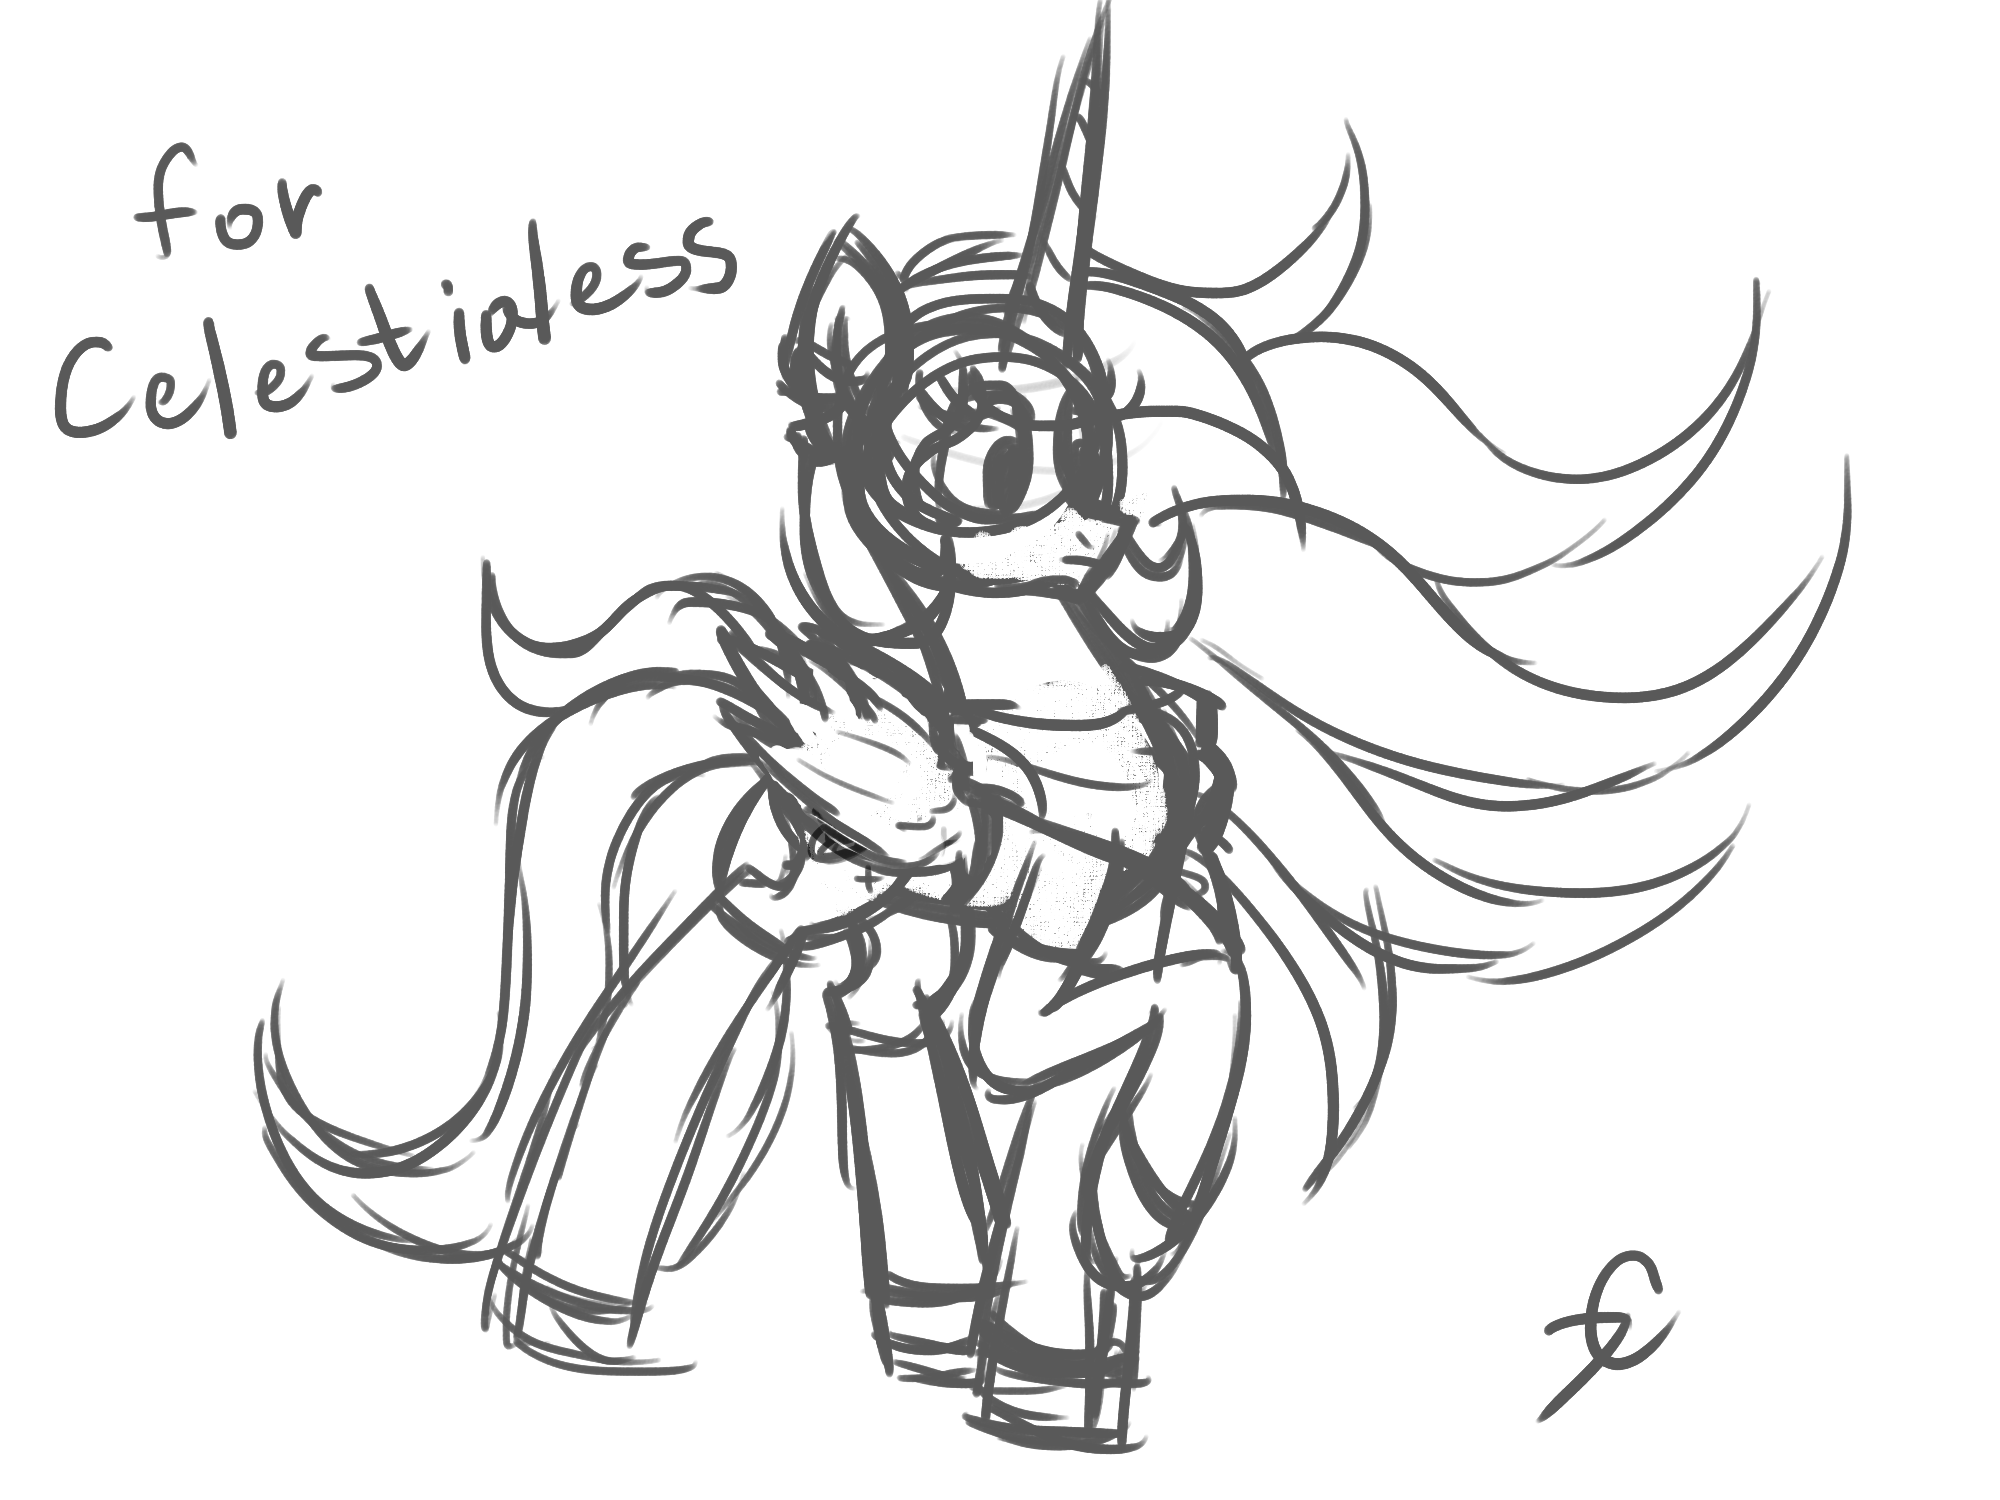 Celestialess scetch